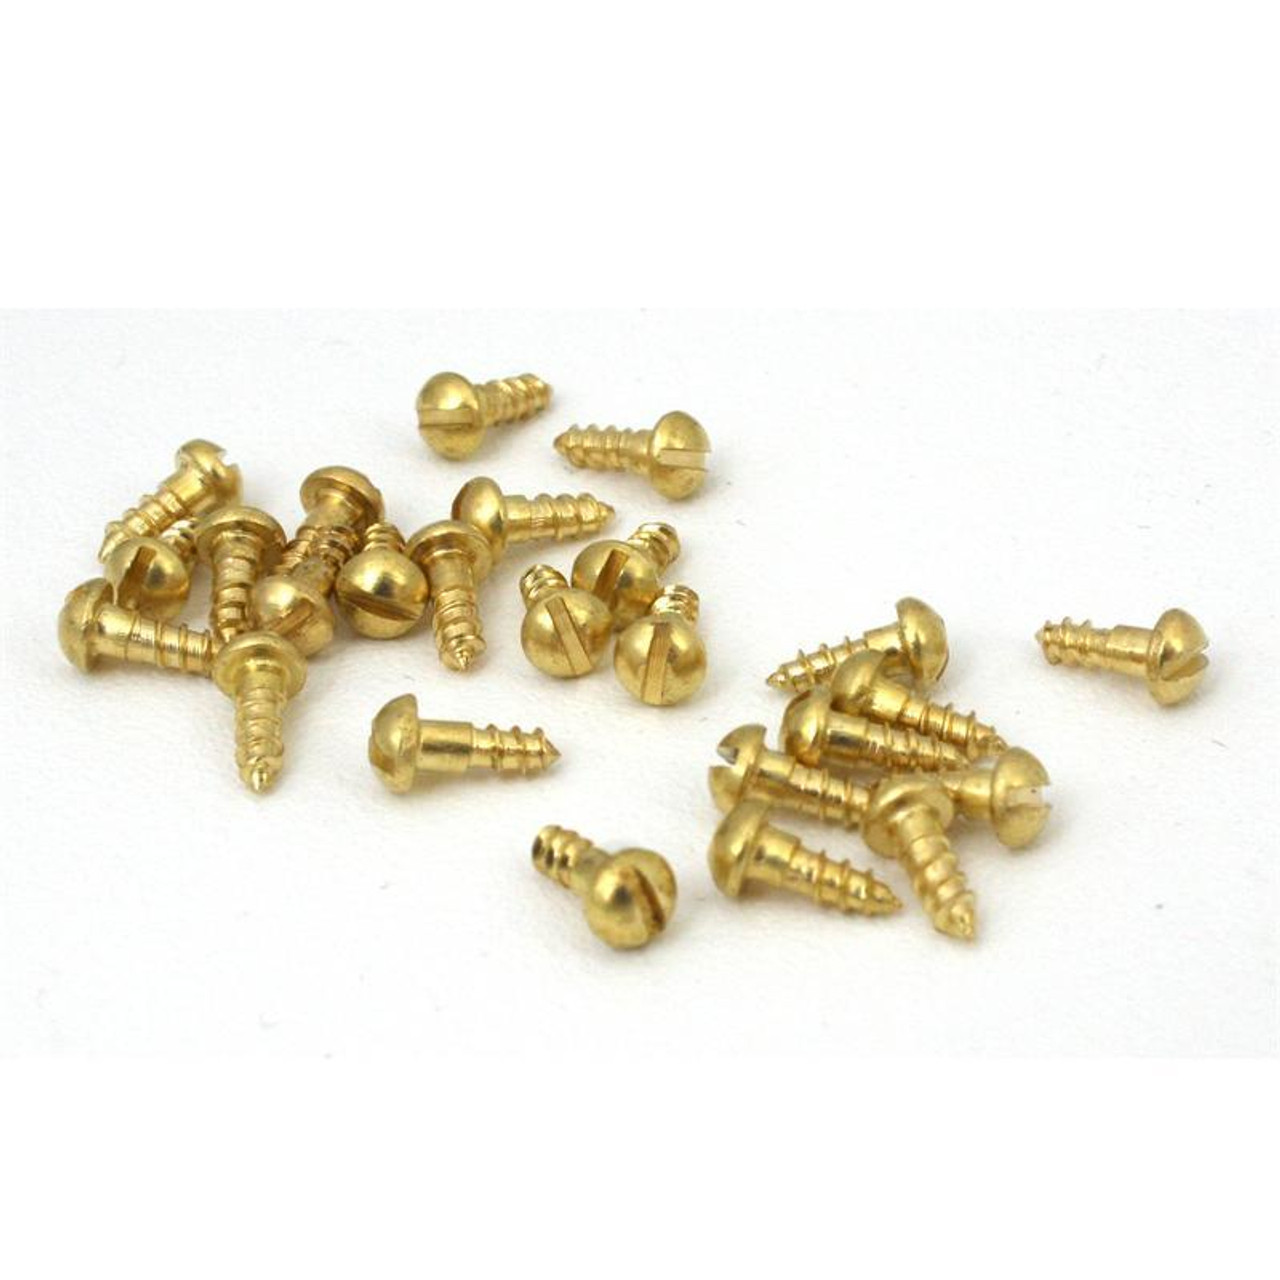 Wood Screws for Engraving Plates Gold Color - Plaque Fasteners